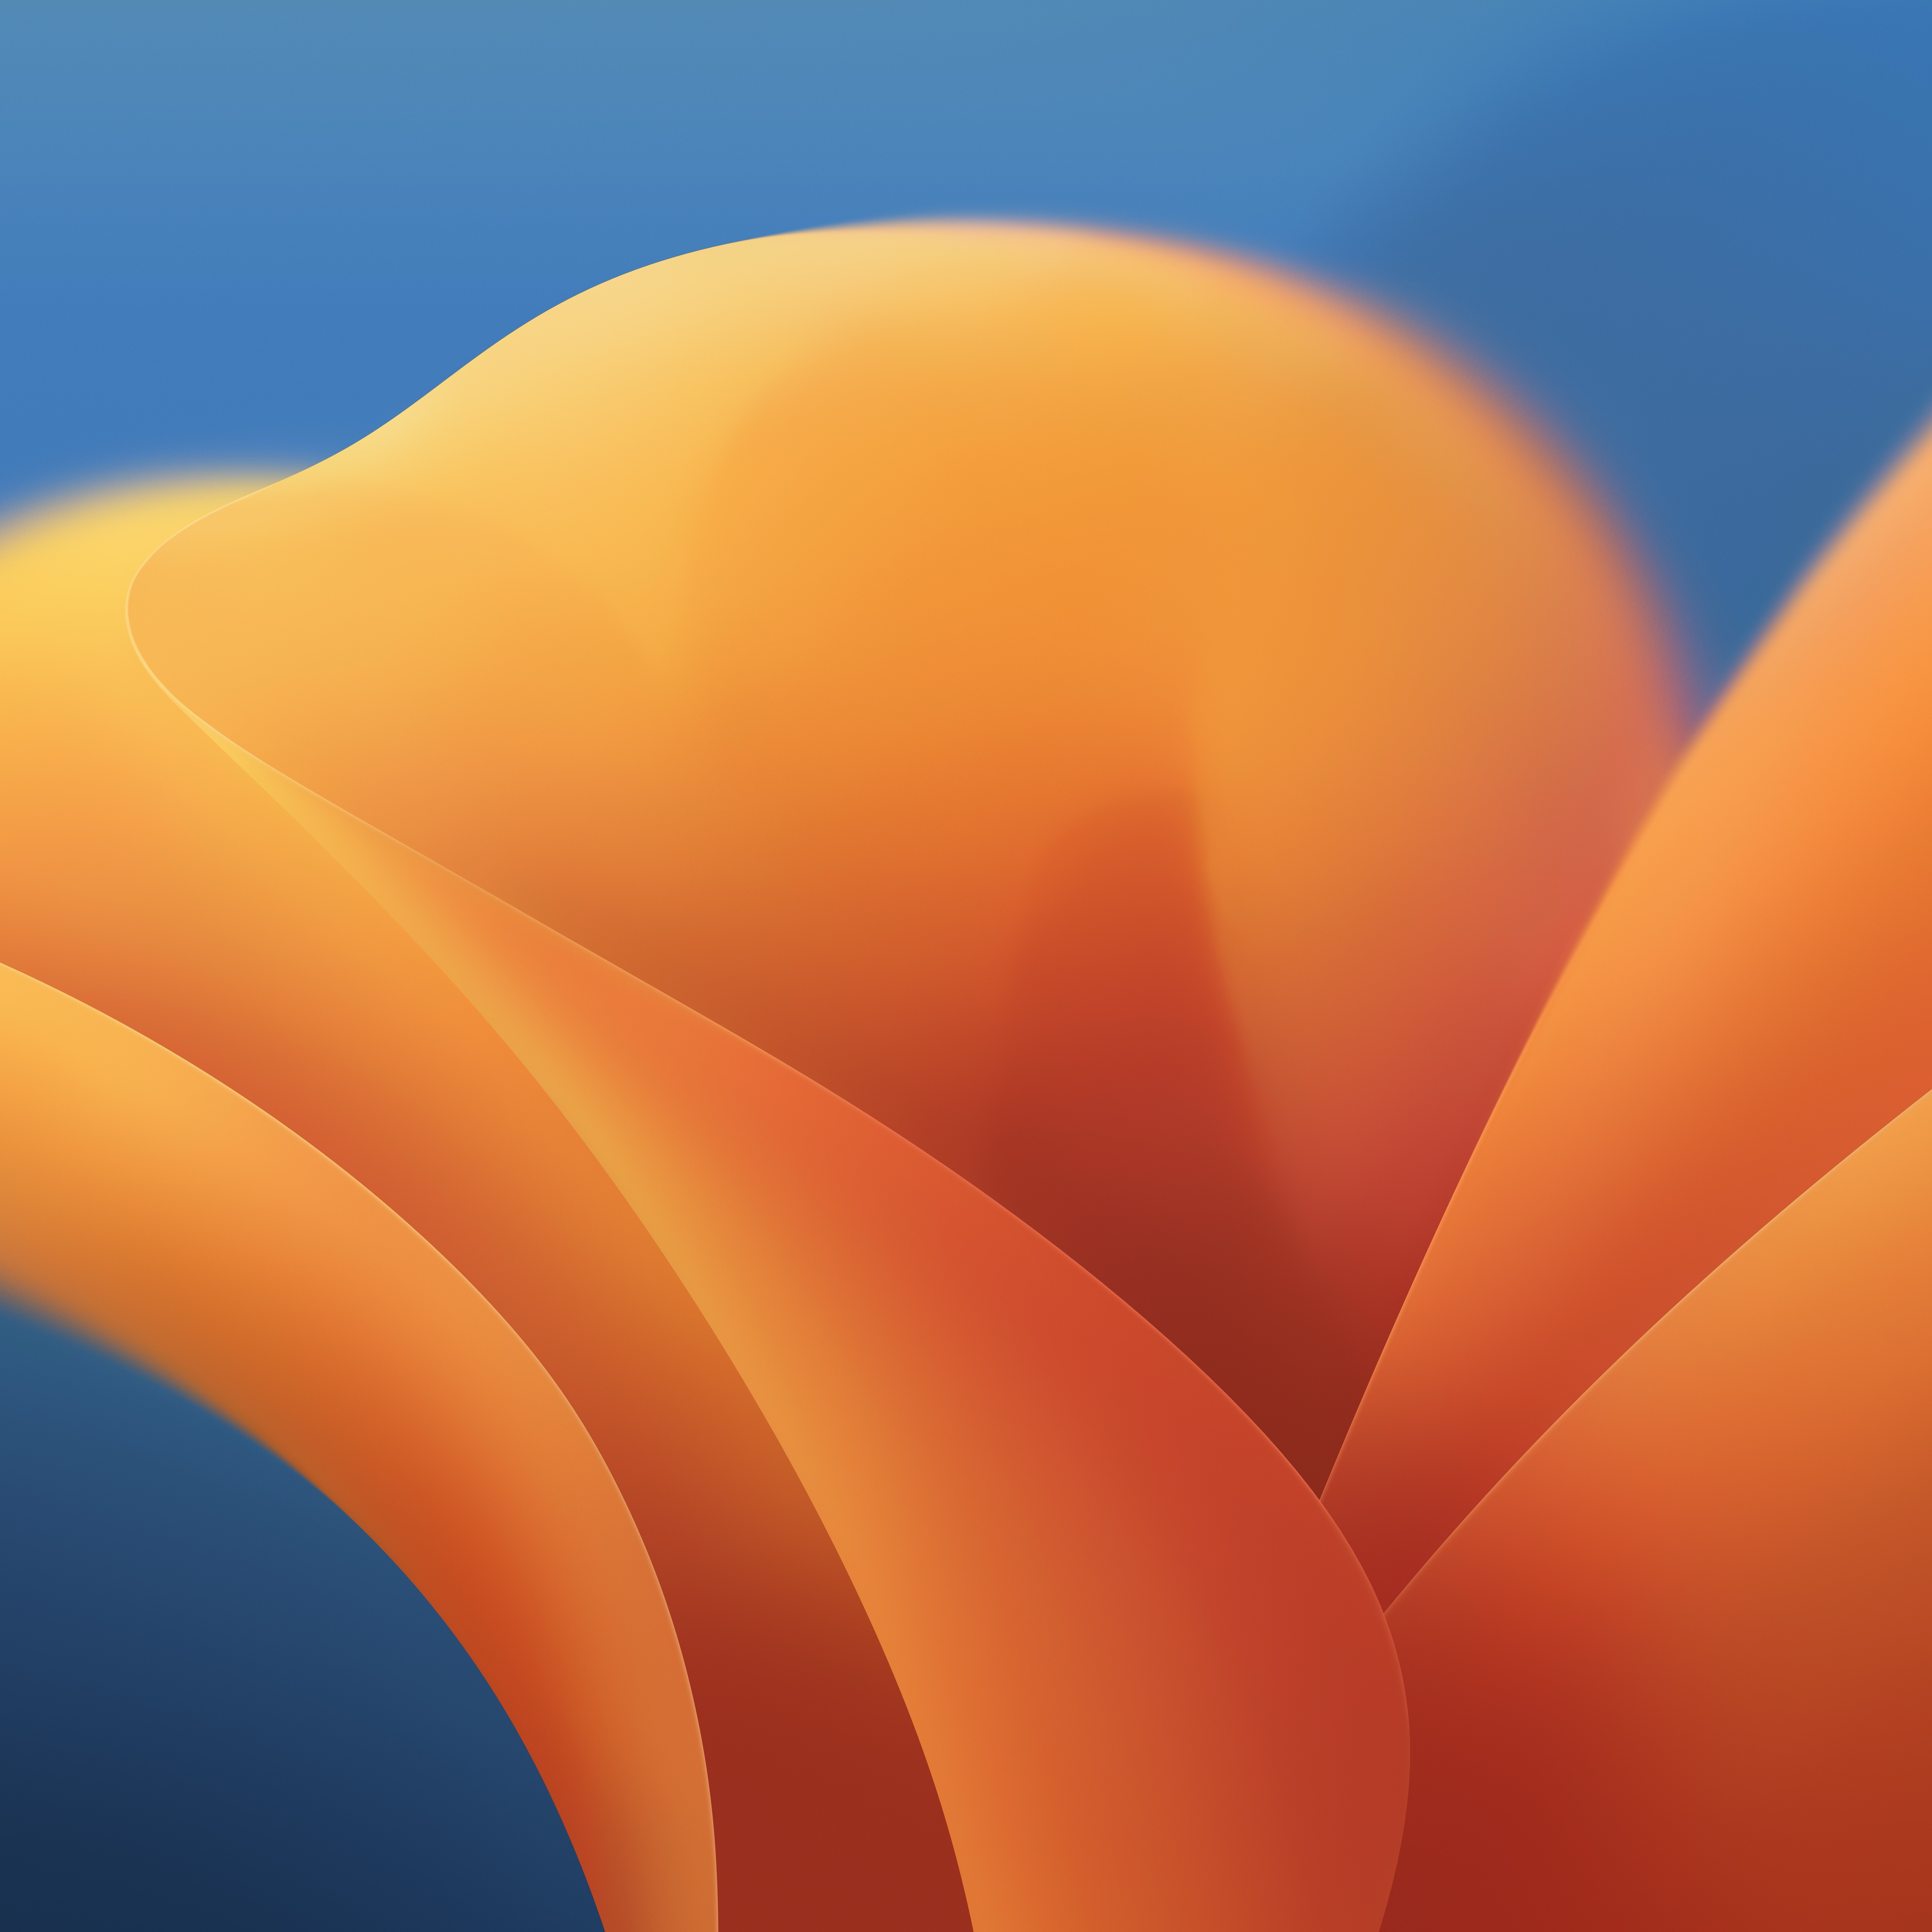 Download the New El Capitan Wallpapers for OS X and iOS - iClarified